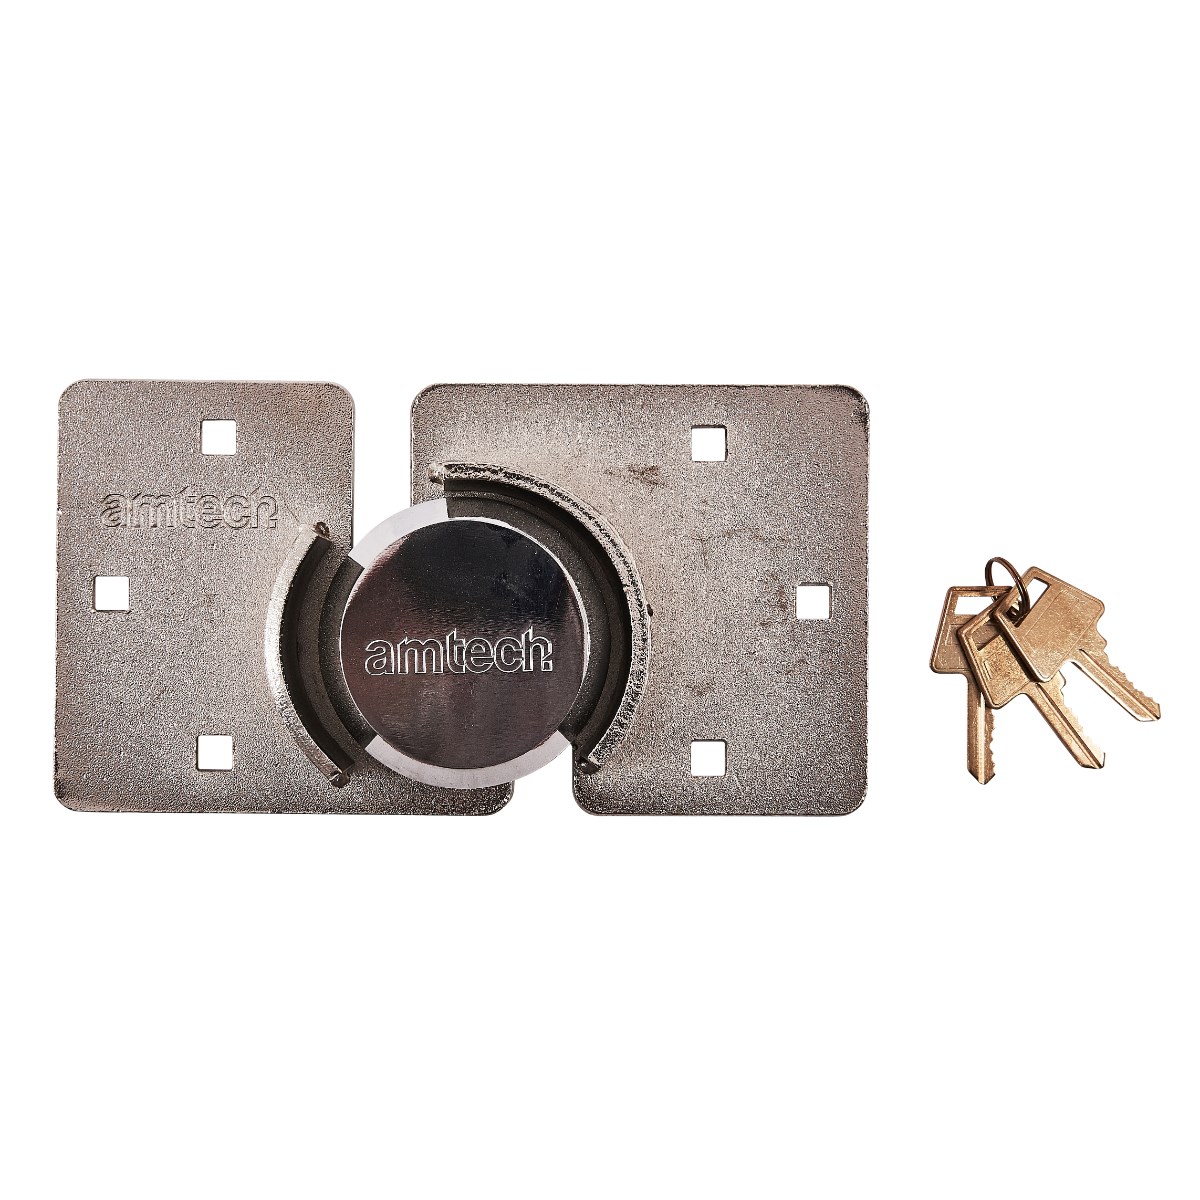 Amtech 73mm Heavy Duty Shackless Round Padlock And Hasp Set Gate Shed Security 